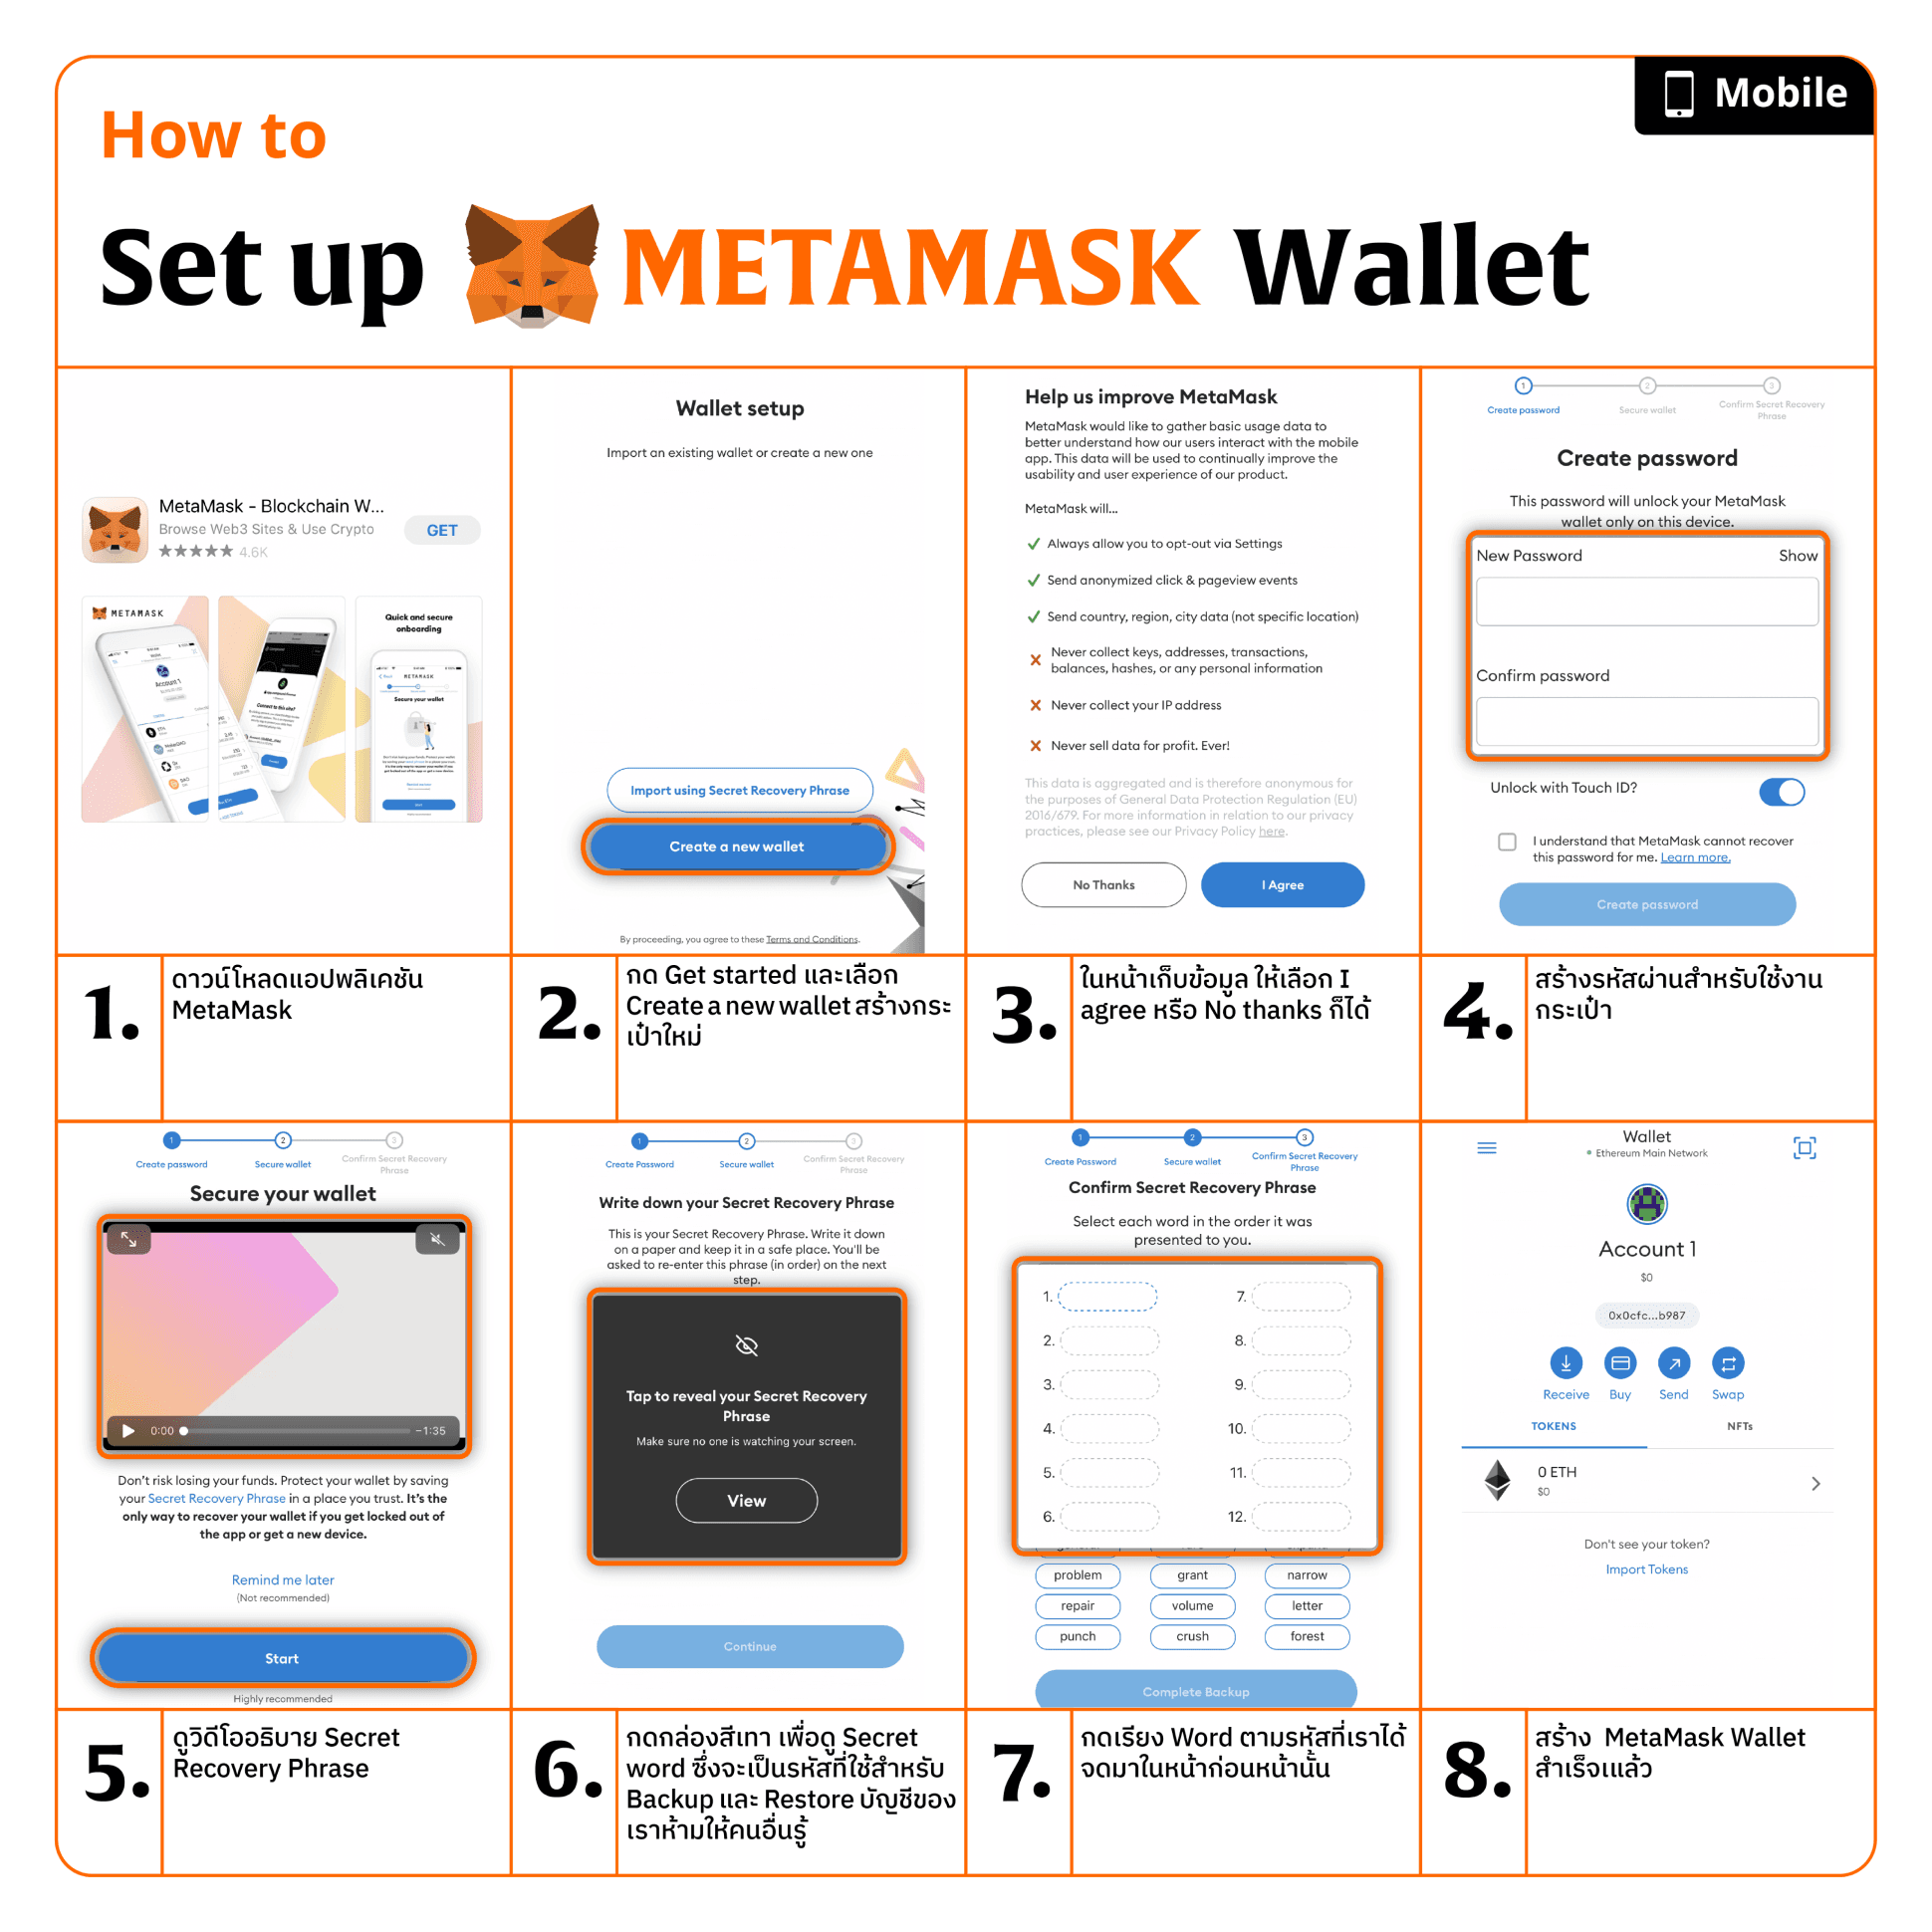 how to set up matamask wallet mobile